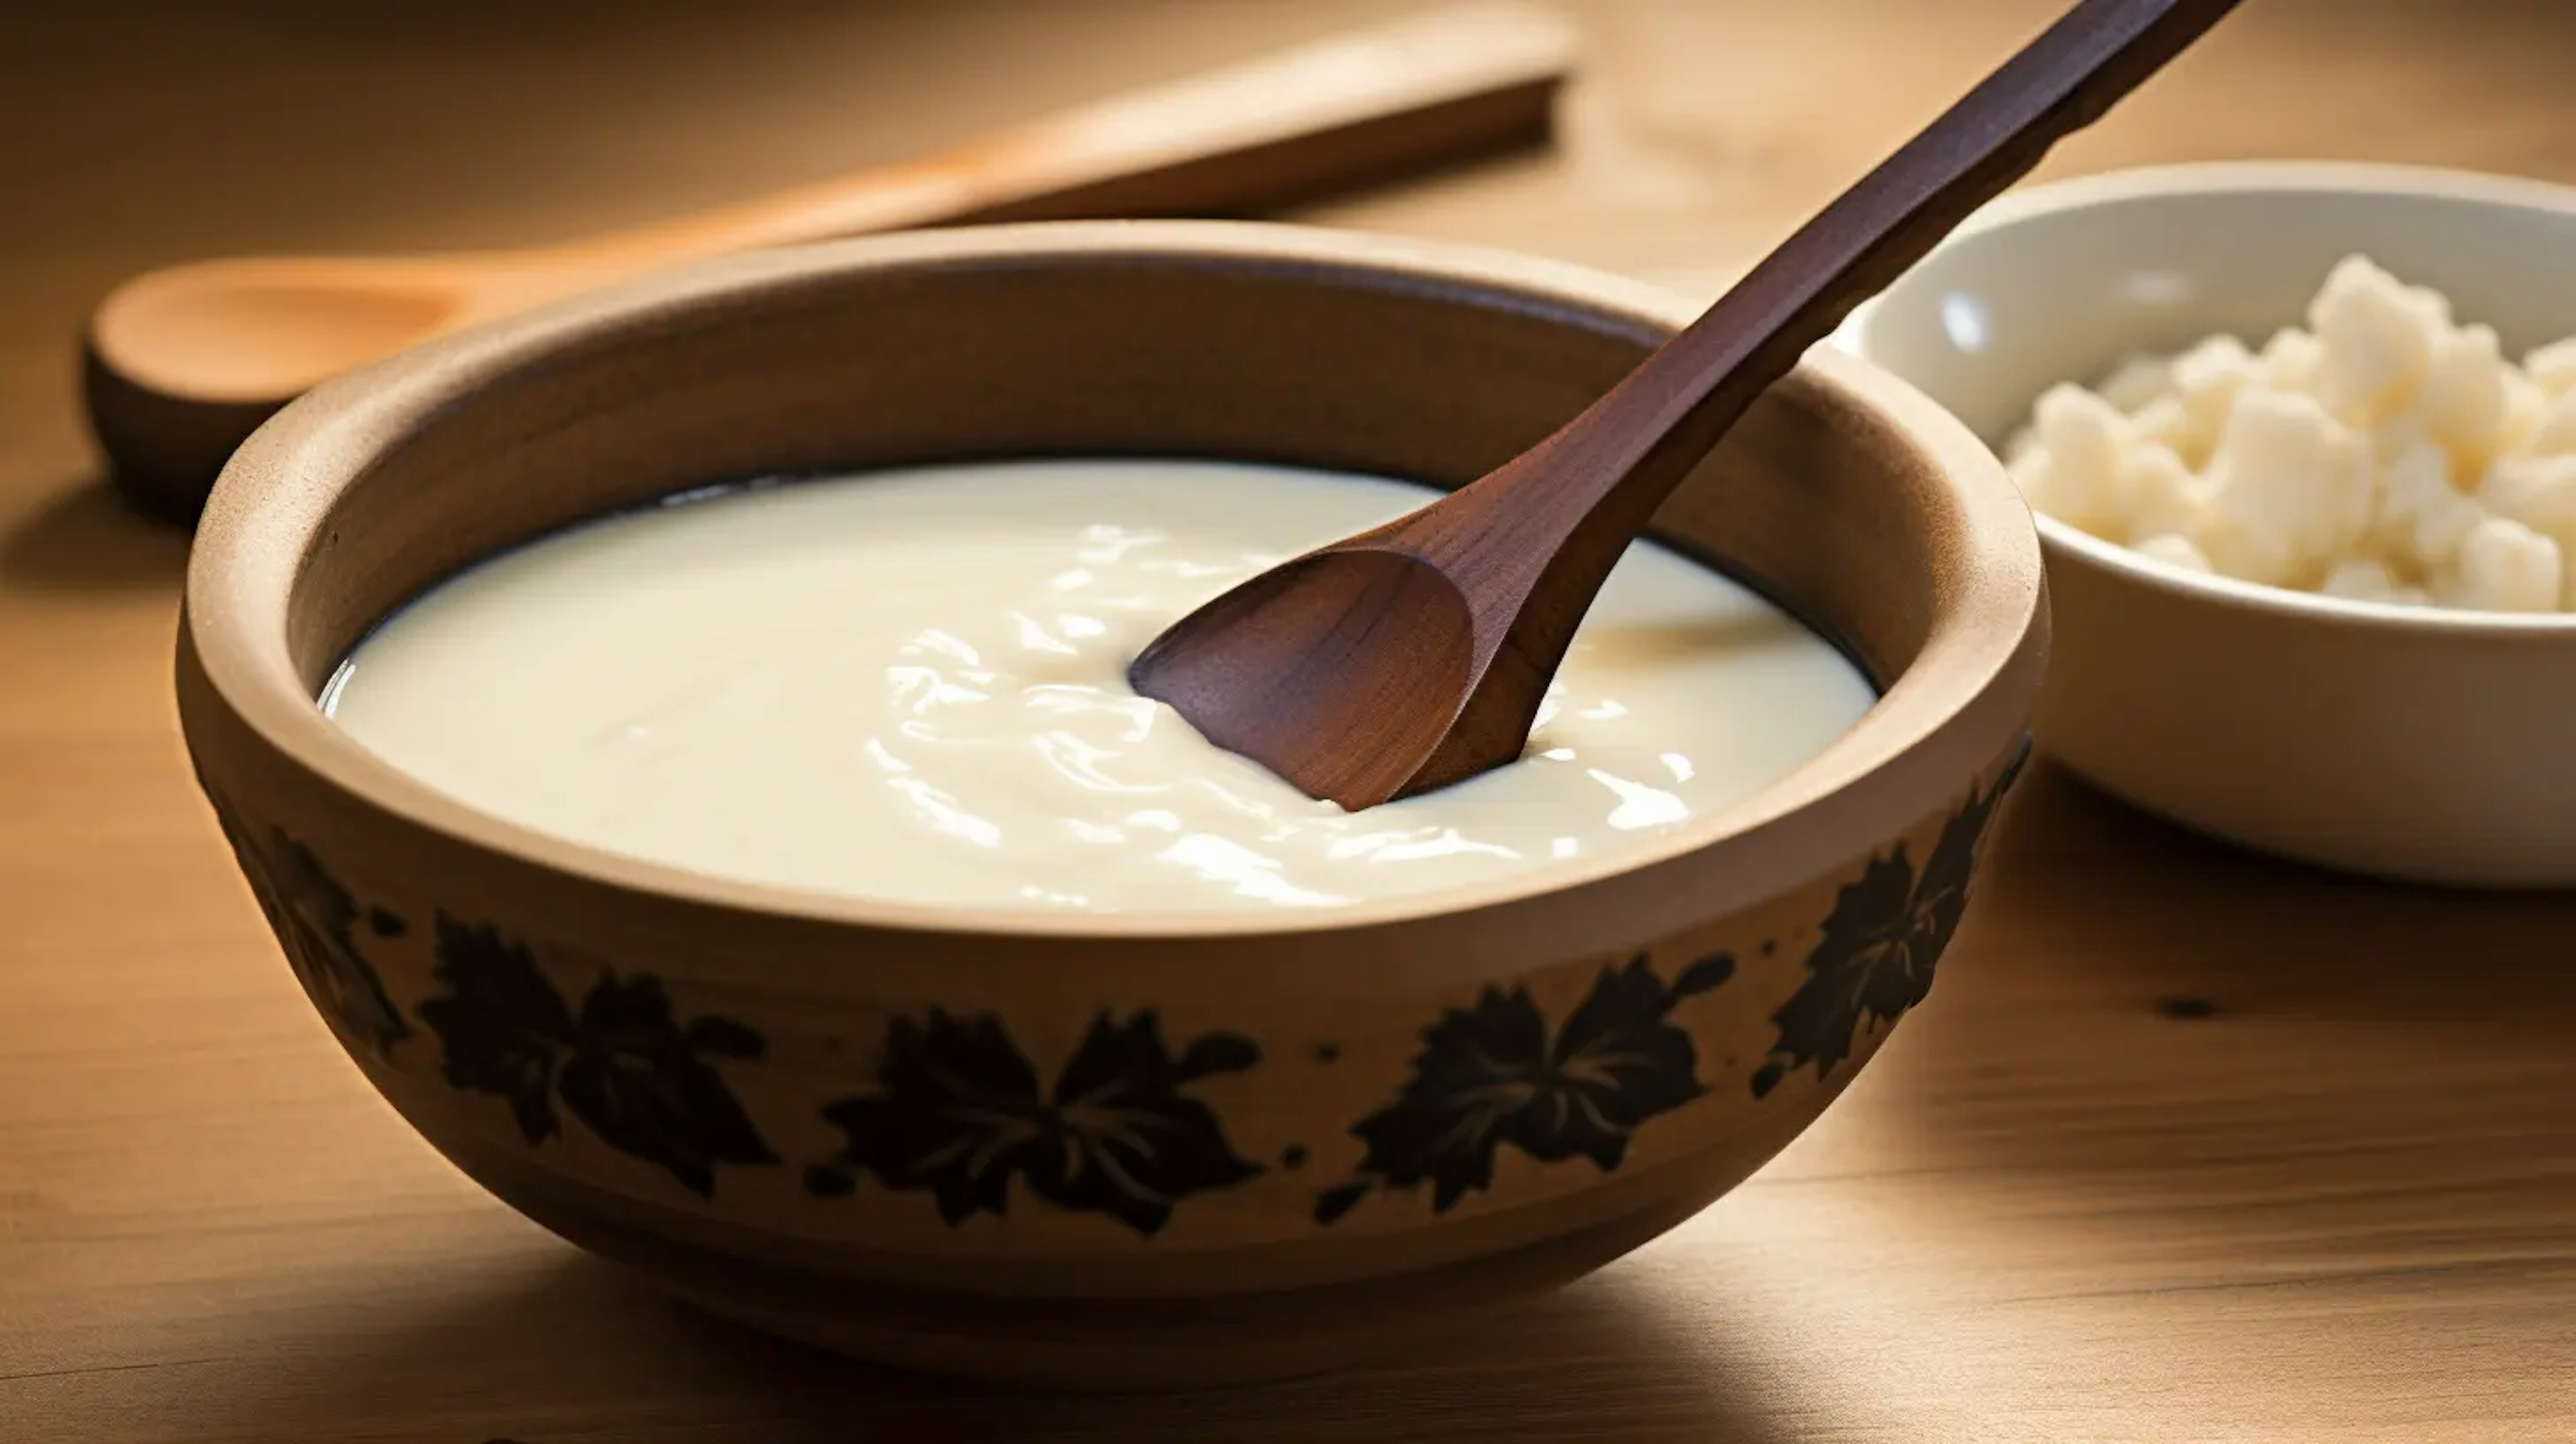 traditional bowl of amazake rice drink with a wooden spoon, symbolizing its ancient Japanese roots